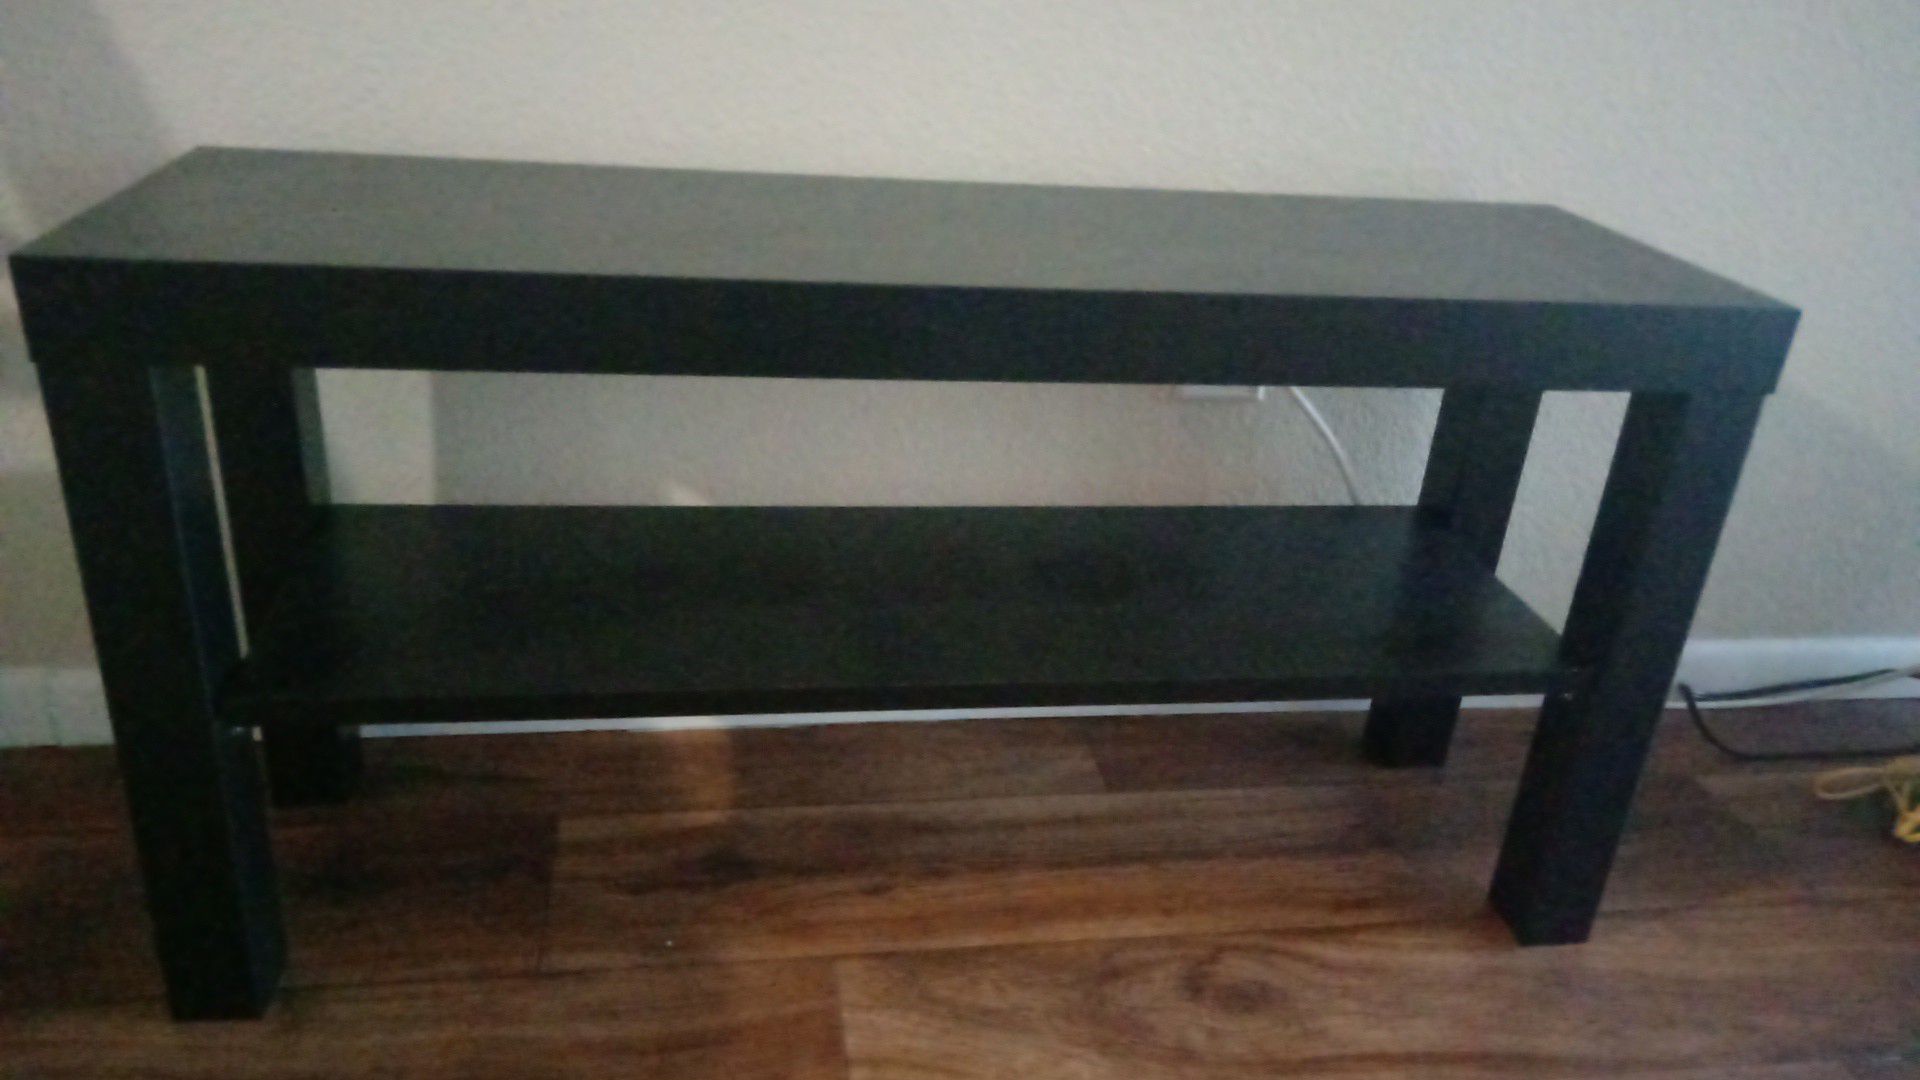 TV stand for sell